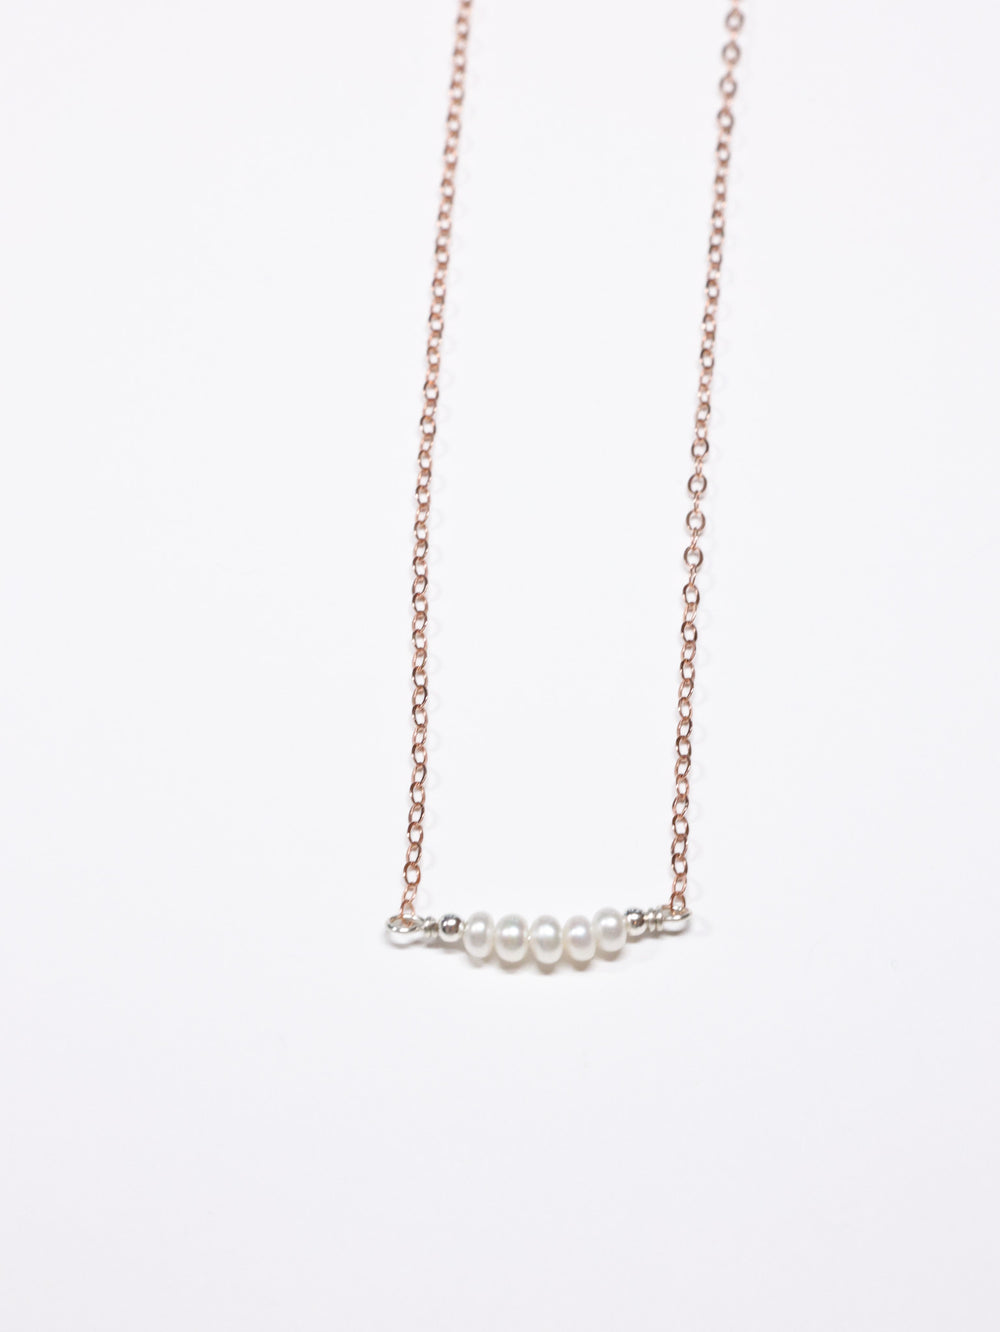 5 Tiny Pearls nh Necklace -rose gold